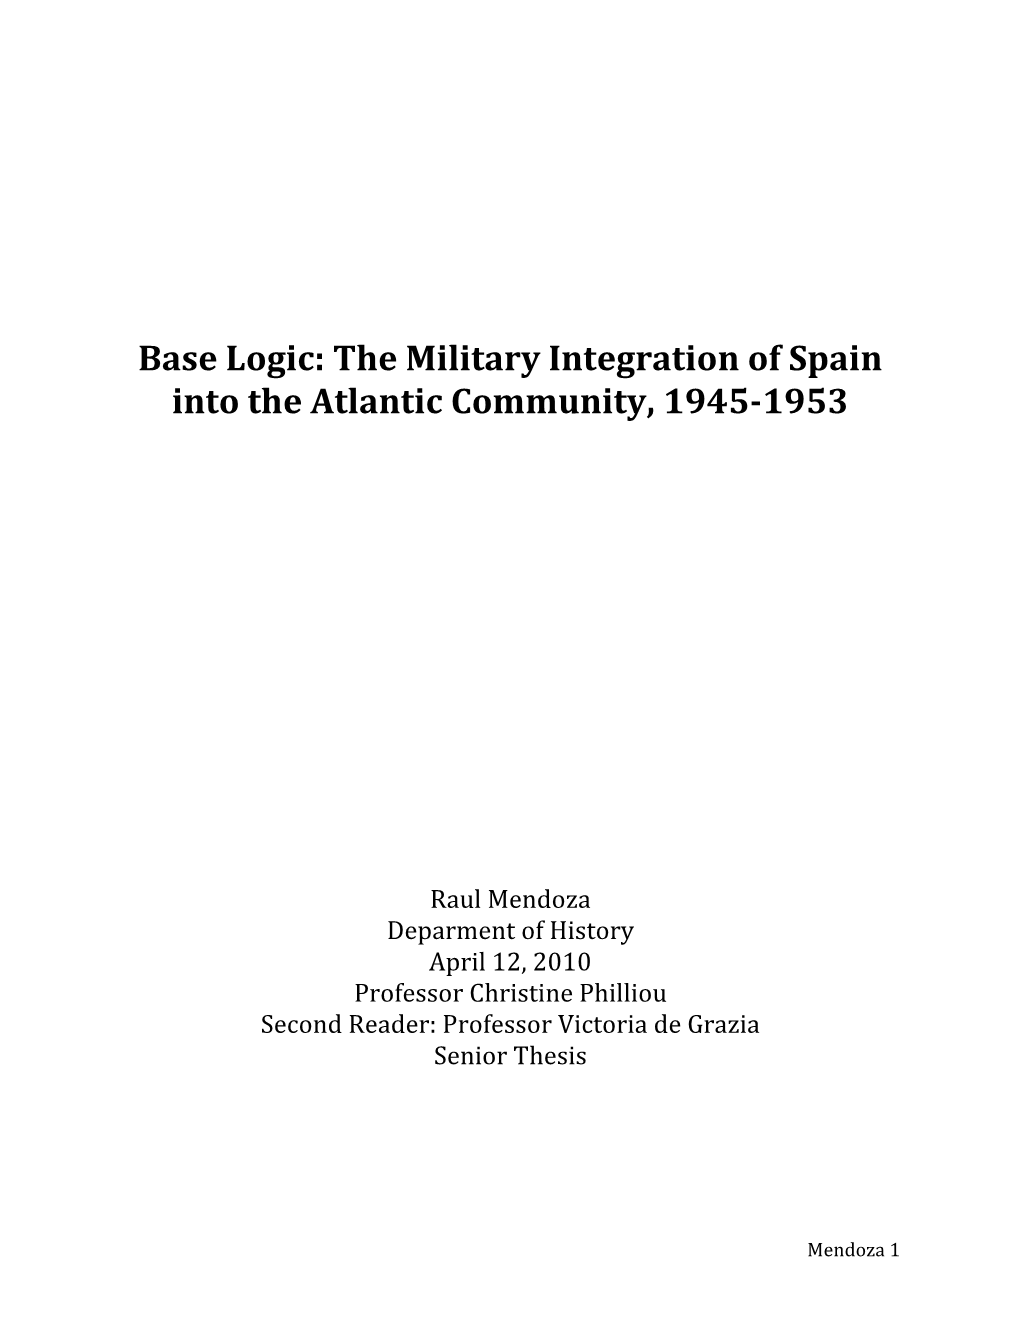 The Military Integration of Spain Into the Atlantic Community, 1945-1953